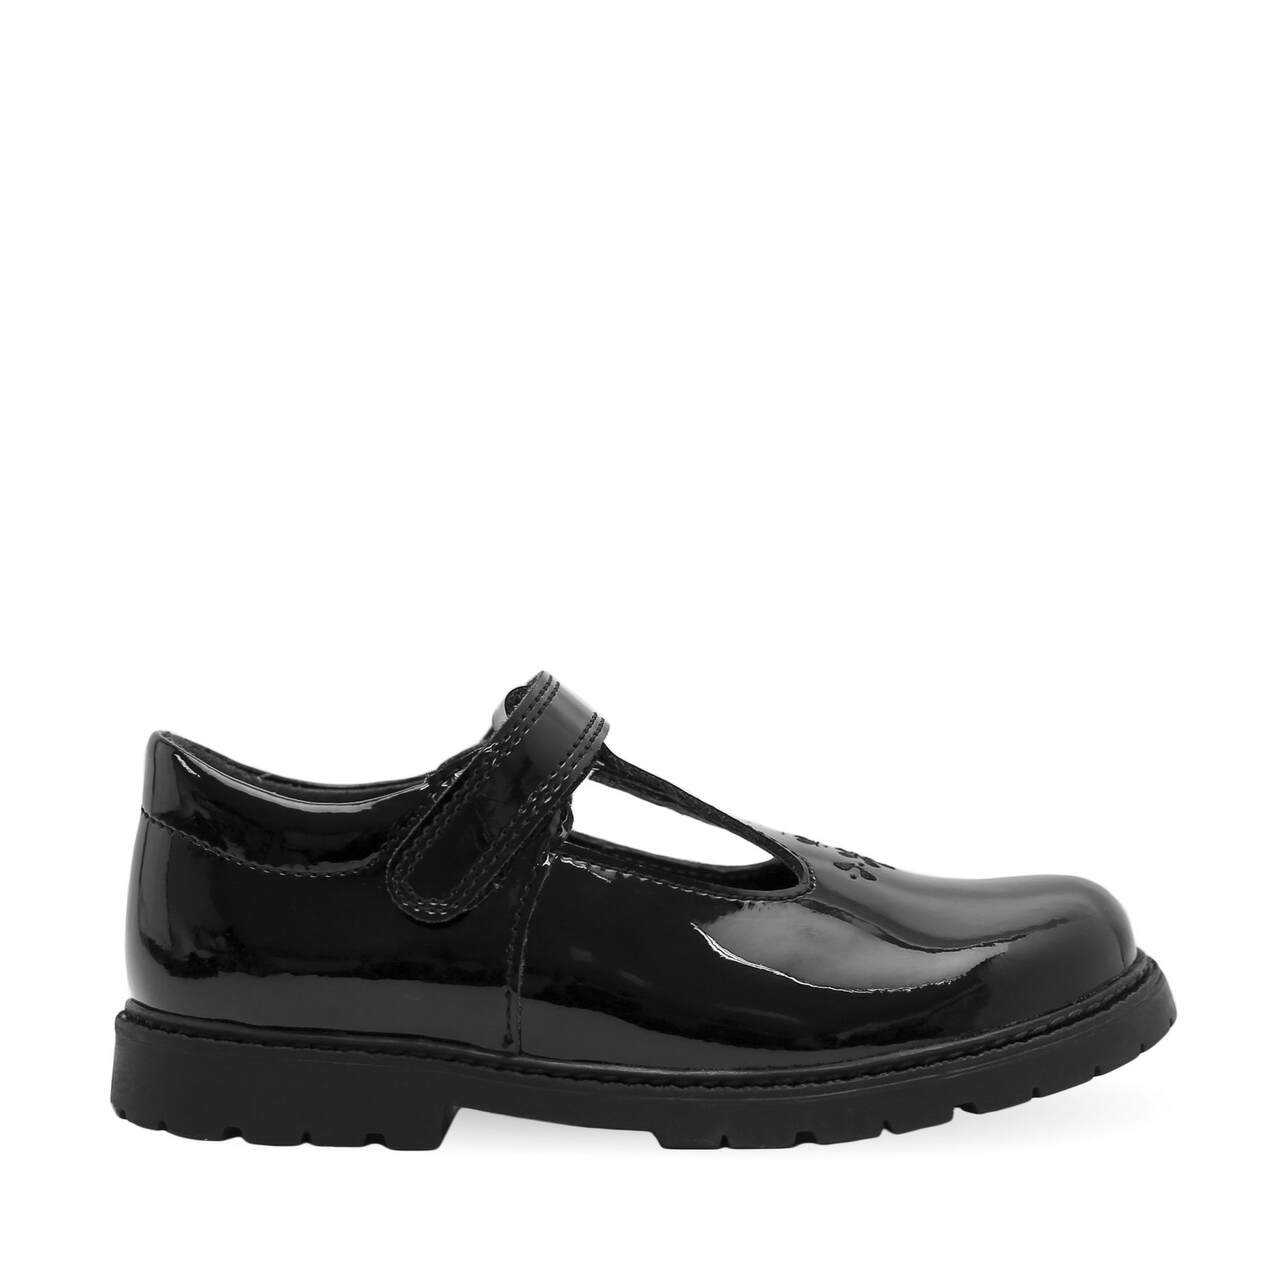 A girls school shoe by Start Rite, style Liberty, in black patent with velcro fastening. Right side view.